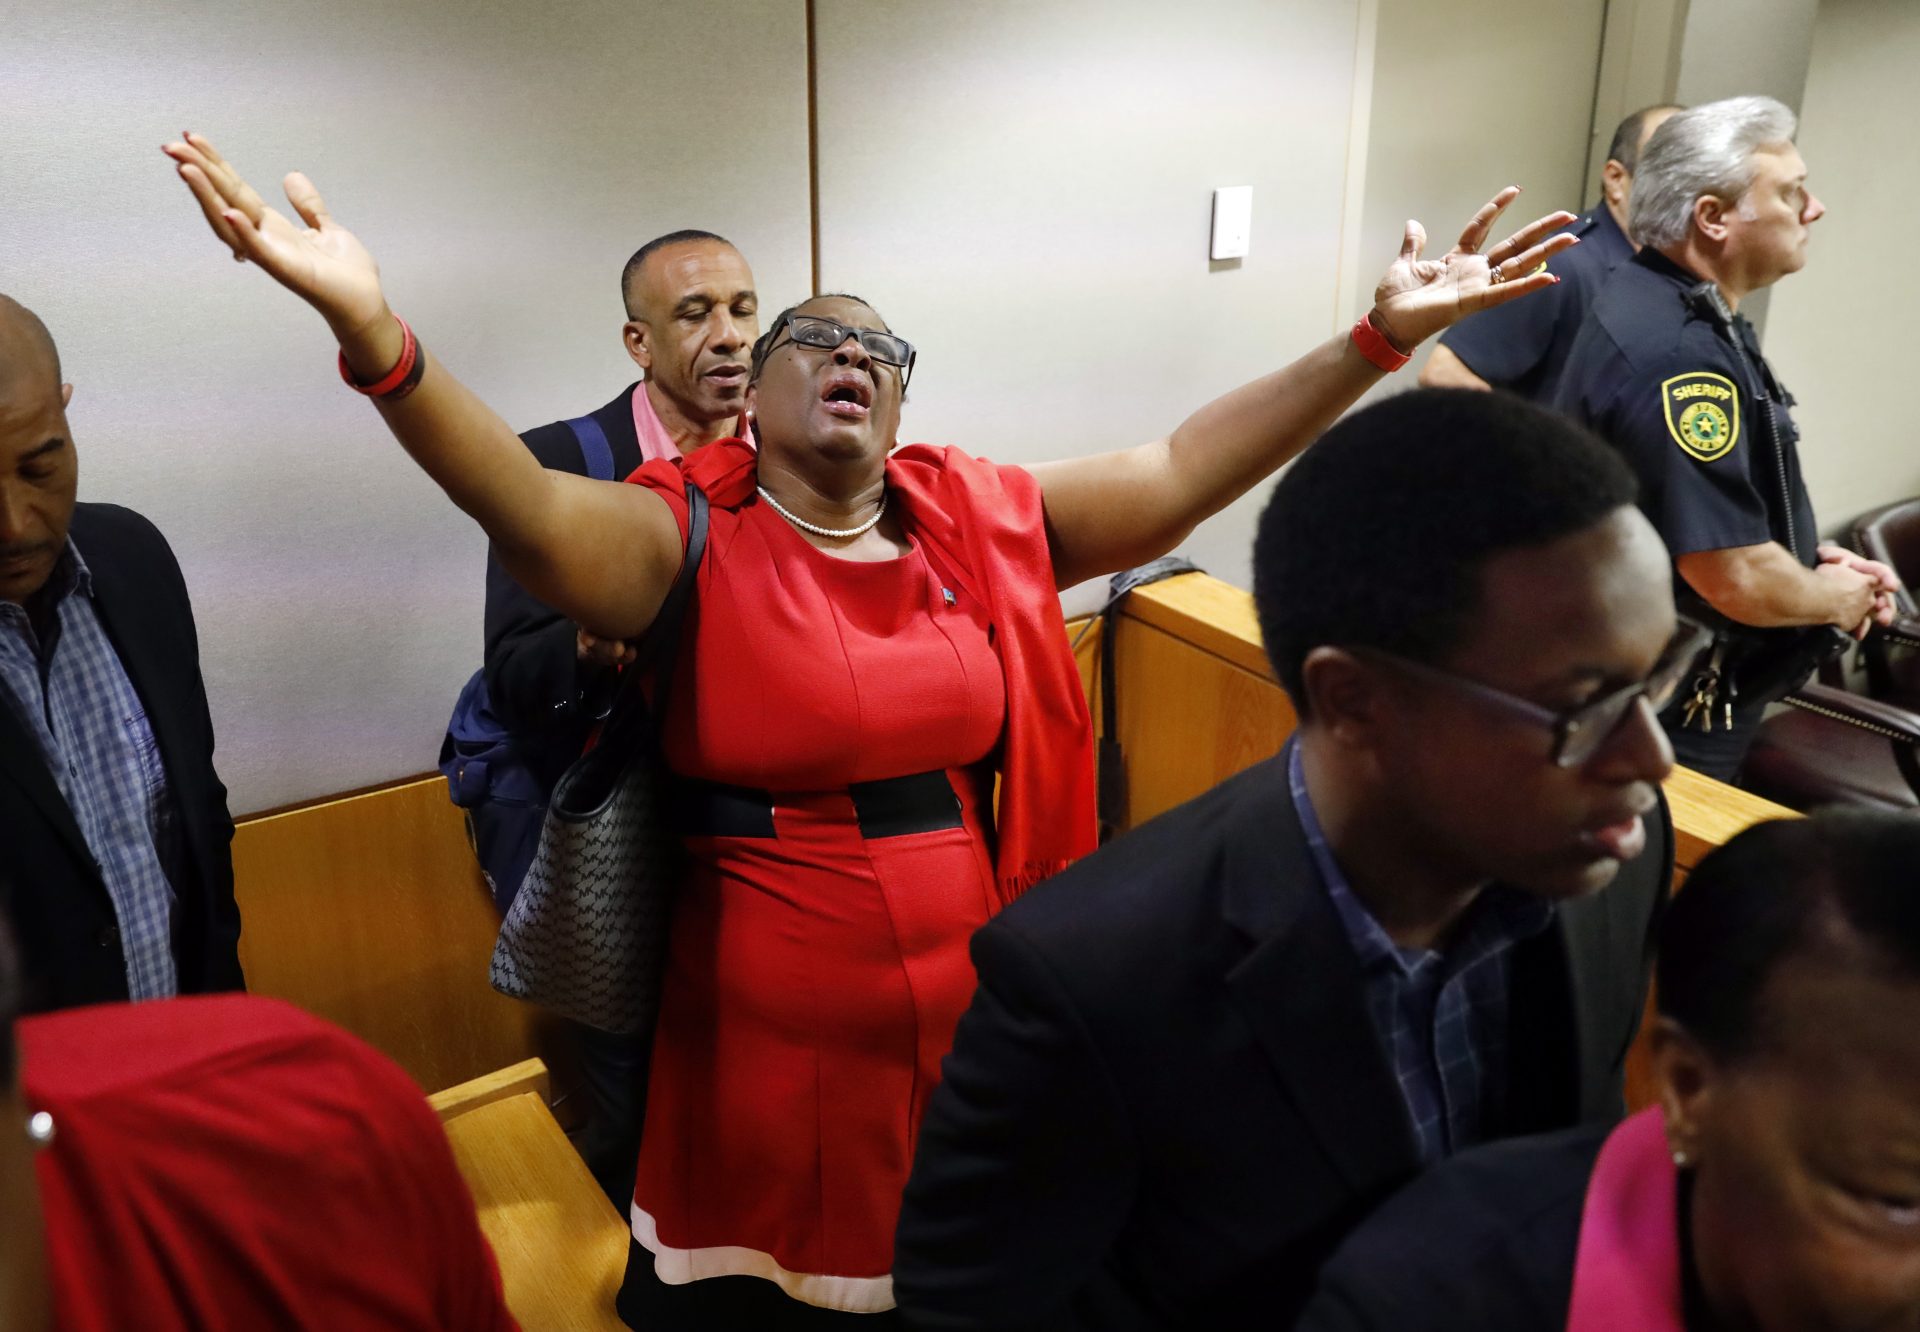 Botham Jean's mother, Allison Jean, rejoices in the courtroom after fired Dallas police Officer Amber Guyger was found guilty of murder, Tuesday, Oct. 1, 2019, in Dallas. Guyger shot and killed Botham Jean, an unarmed 26-year-old neighbor in his own apartment last year. She told police she thought his apartment was her own and that he was an intruder.